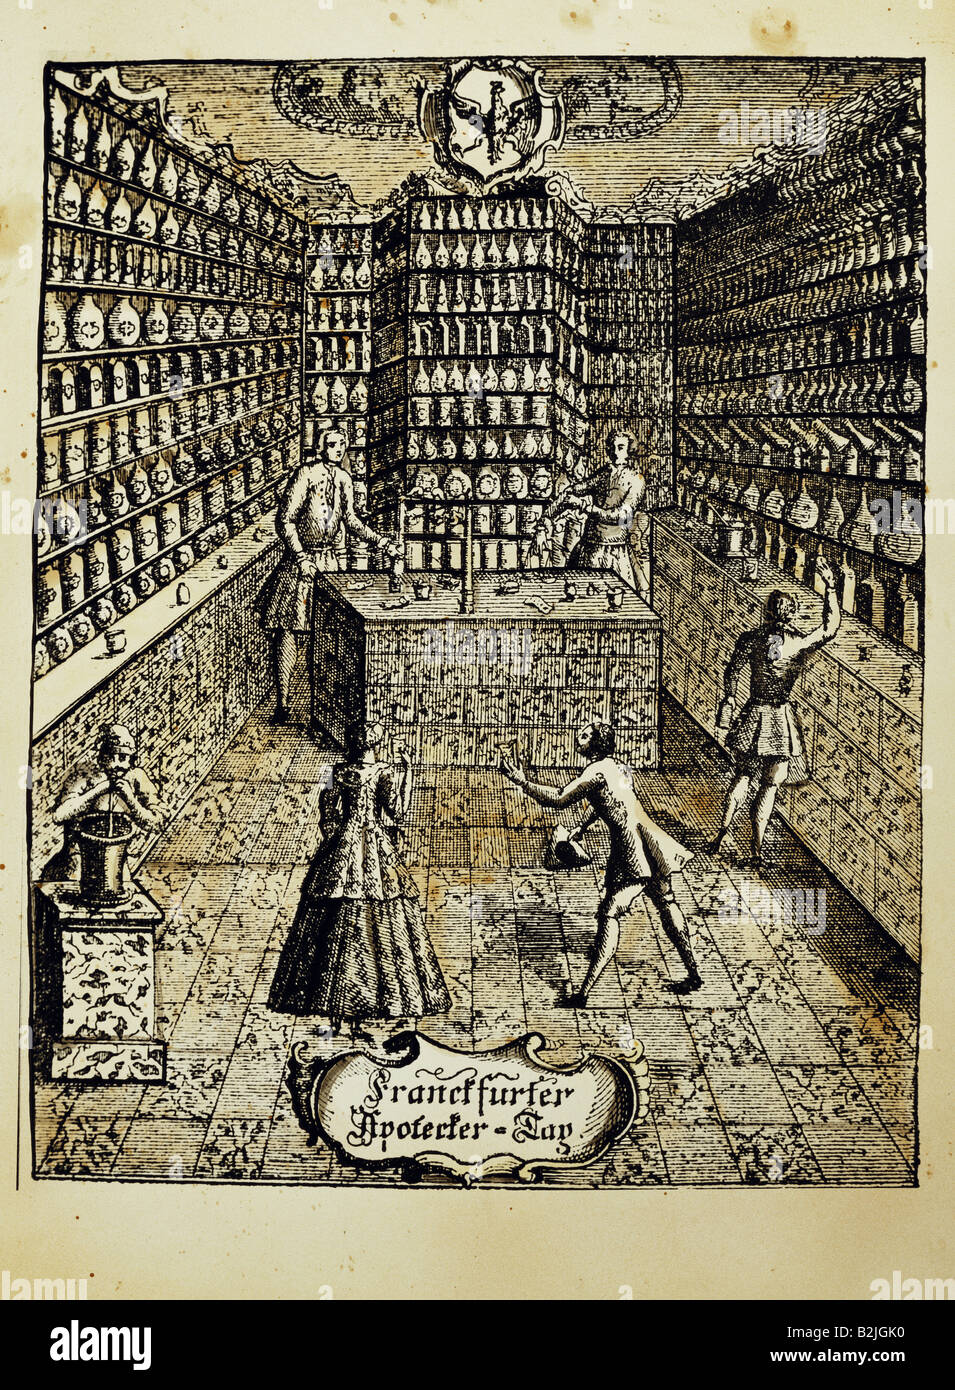 medicine, pharmacy, 'Frankfurter Apotheken-Tag' (Frankfurt pharmacy day), copper engraving, from 'Reformation oder erneuerte Ordnung der heiligen Reichsstadt Frankfurt am Main' (Reformation or renewed order of the holy imperial town Frankfurt on the Main), Frankfurt, 1668, private collection, Artist's Copyright has not to be cleared Stock Photo